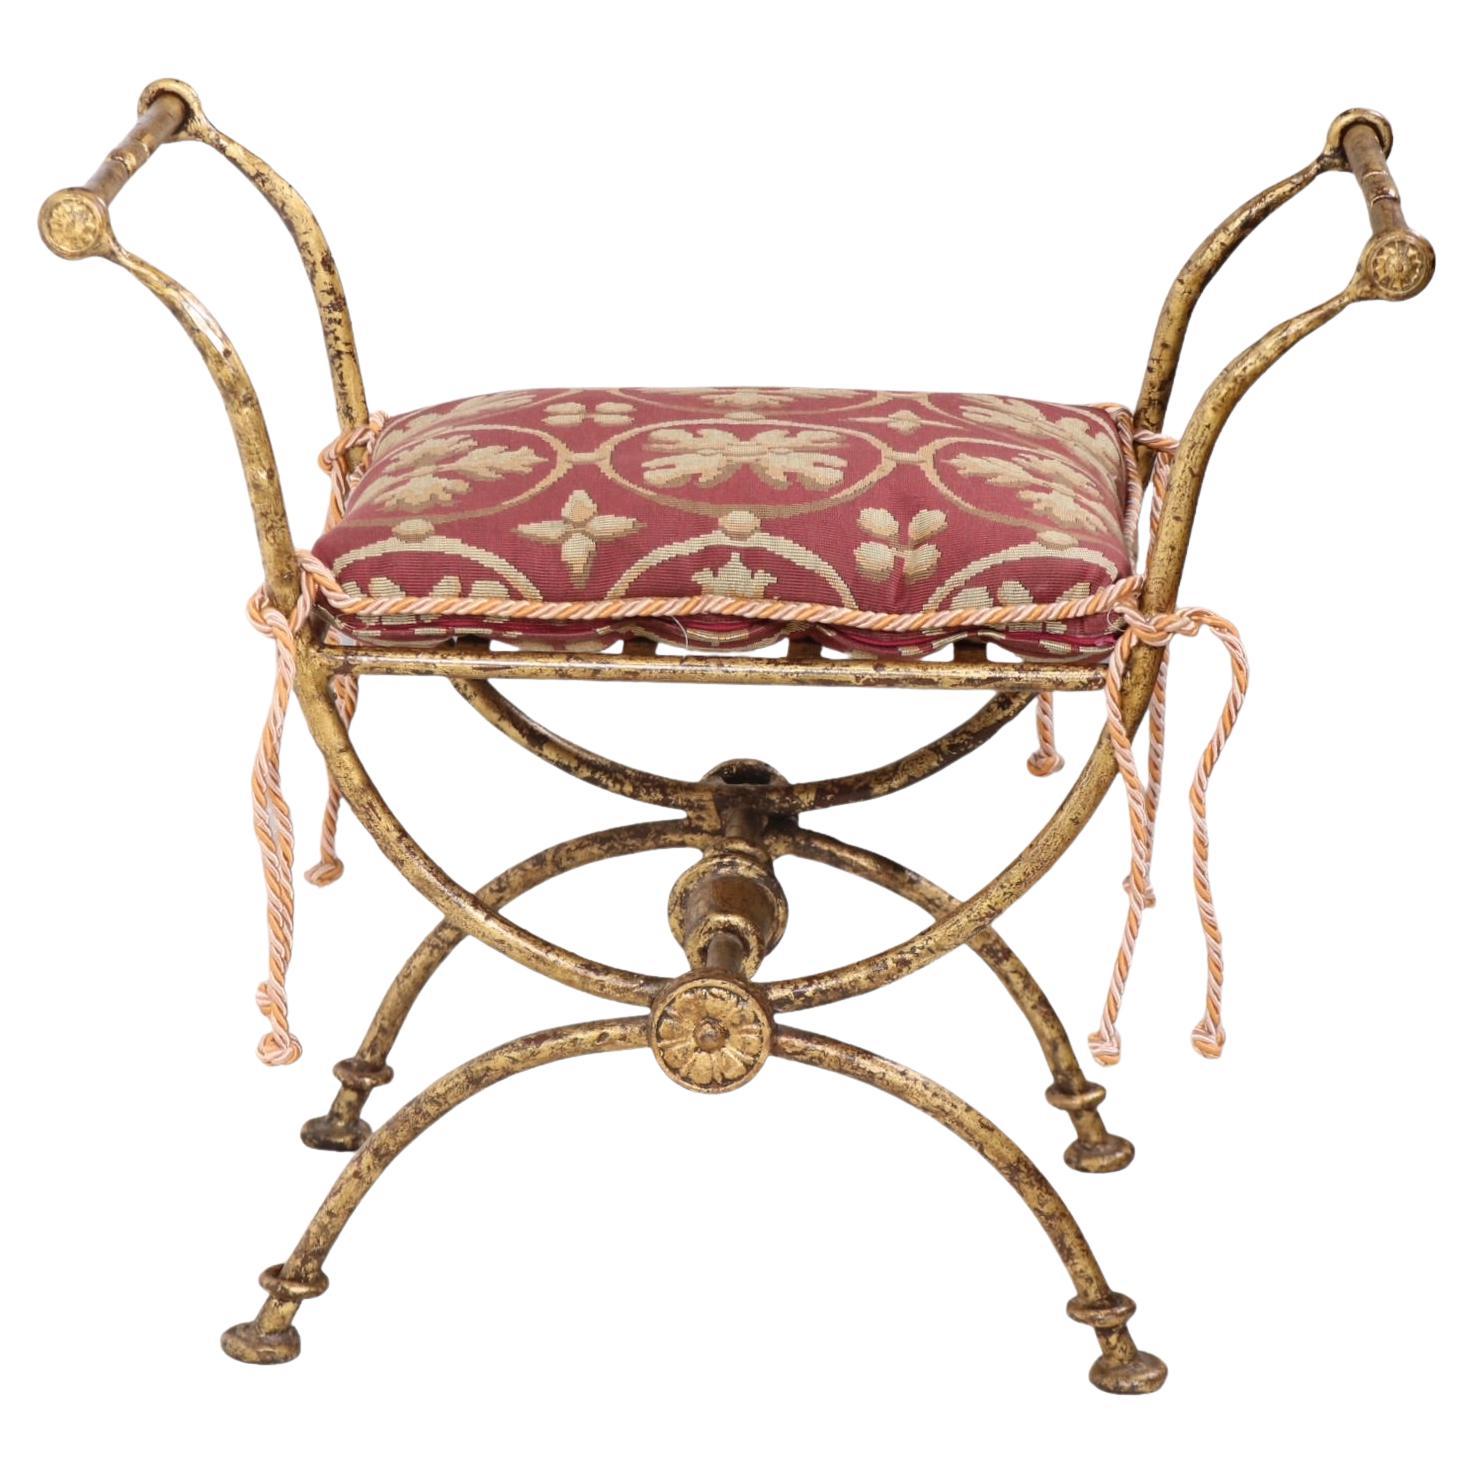 Wrought Iron Vanity Widow Bench in Faux Gilt Finish c 1940/1960's 